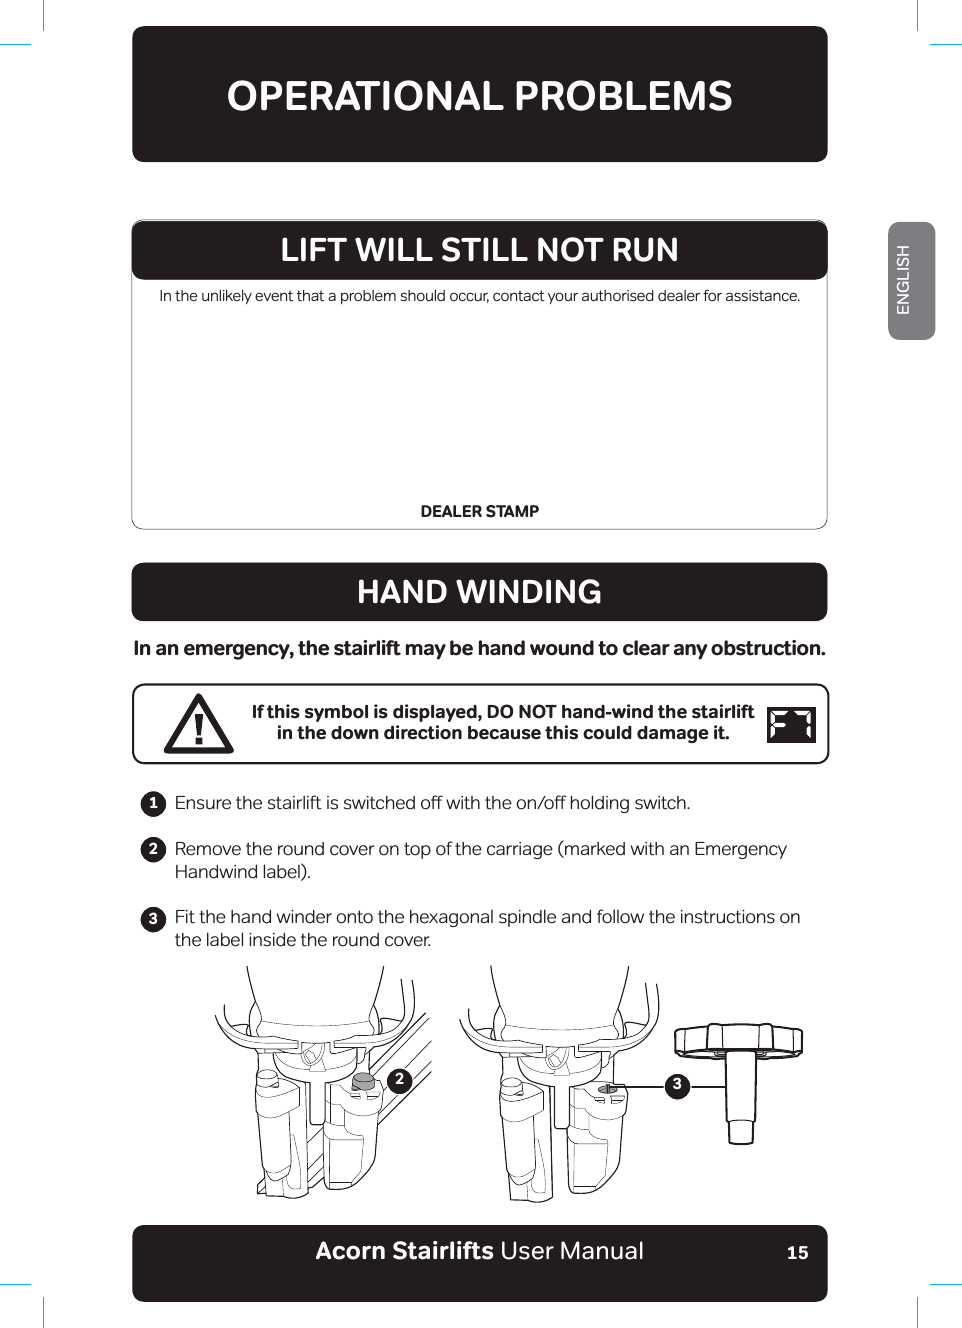 Acorn Stairlifts User ManualENGLISH15In the unlikely event that a problem should occur, contact your authorised dealer for assistance.DEALER STAMPOPERATIONAL PROBLEMSHAND WINDINGIn an emergency, the stairlift may be hand wound to clear any obstruction.If this symbol is displayed, DO NOT hand-wind the stairlift in the down direction because this could damage it.(QVXUHWKHVWDLUOLIWLVVZLWFKHGRƶZLWKWKHRQRƶKROGLQJVZLWFKRemove the round cover on top of the carriage (marked with an Emergency Handwind label).Fit the hand winder onto the hexagonal spindle and follow the instructions on the label inside the round cover.23LIFT WILL STILL NOT RUN123